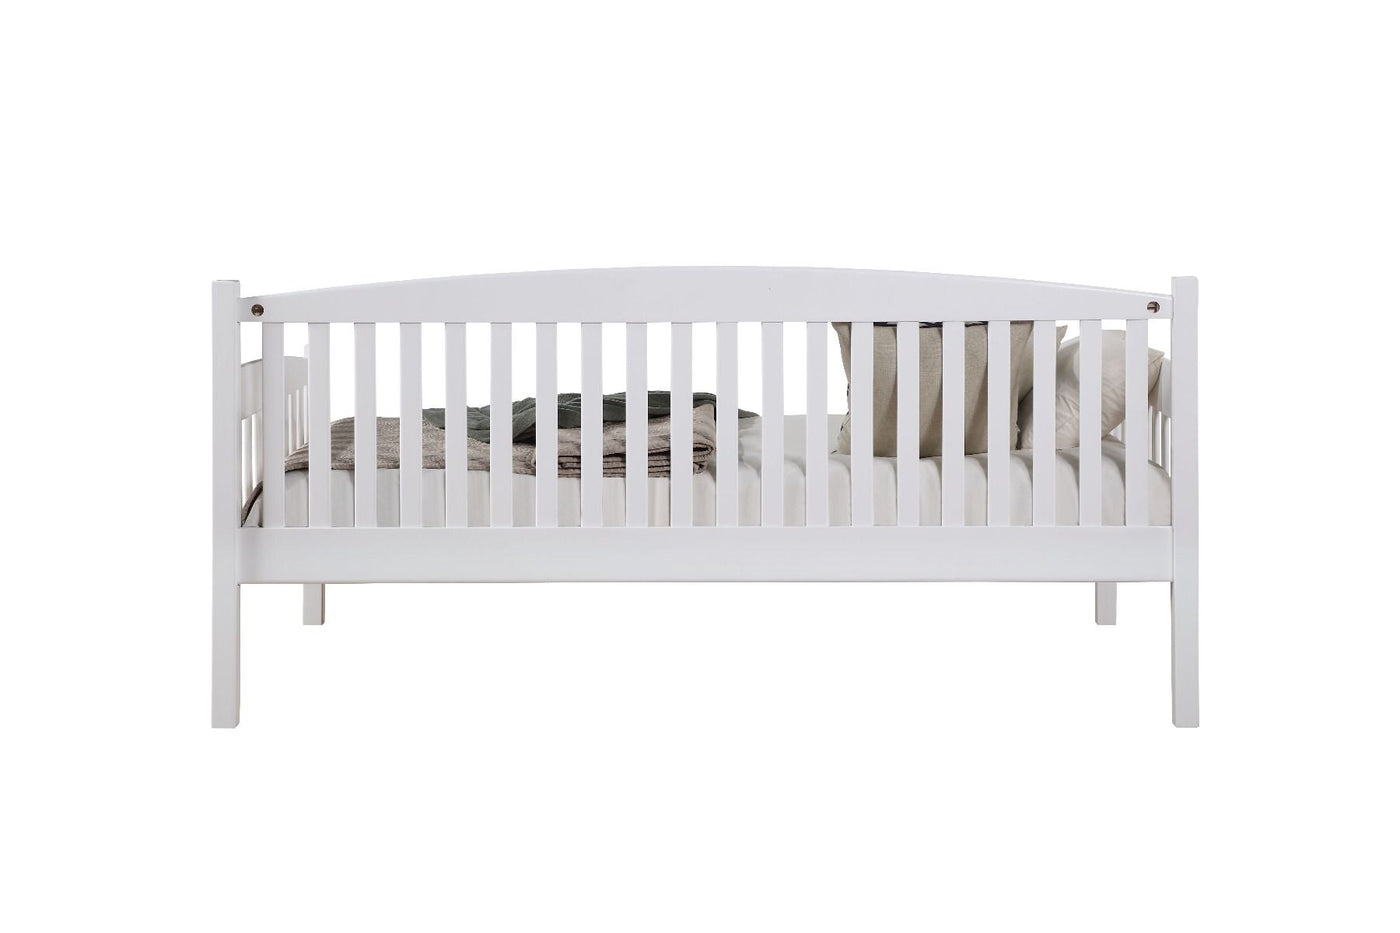 ACME Caryn Daybed #color_White Finish